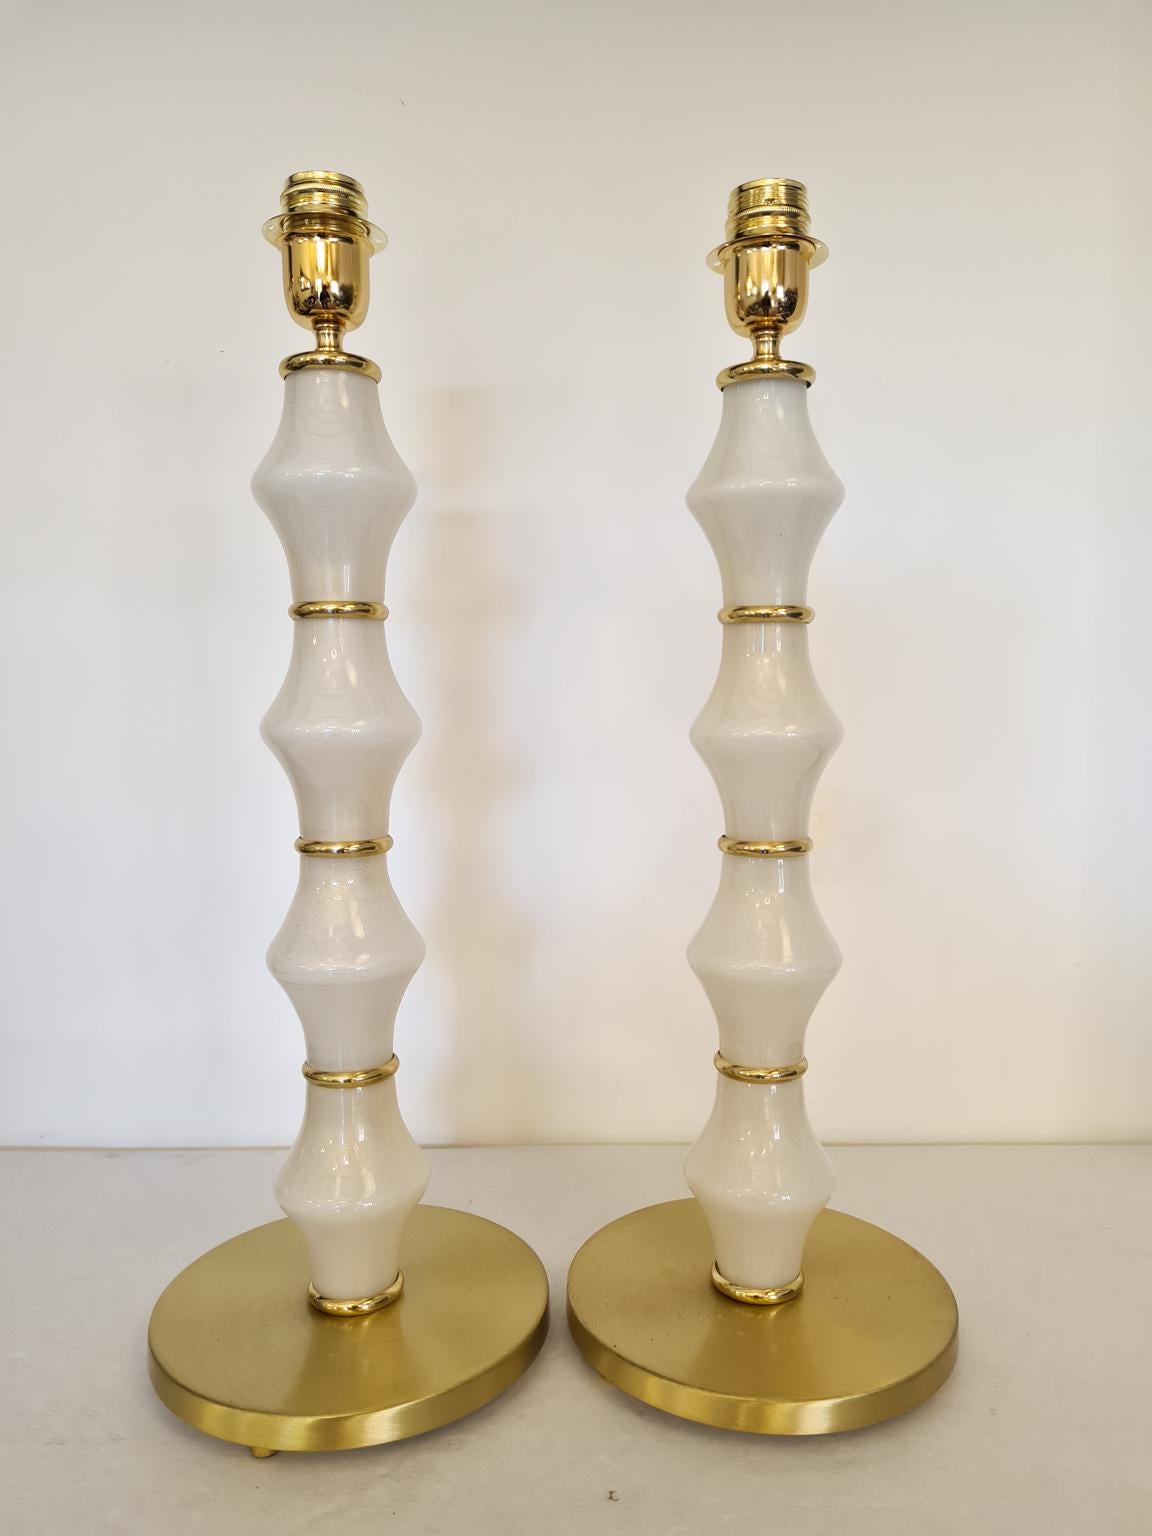 Exclusive pair of Murano glass table lamps white gold color and gold chrome rings.
Lamp made with great care and precision by our master glassmaker Alberto Donà of Murano
The products are entirely handmade in the Mid-Century Modern style.
Project